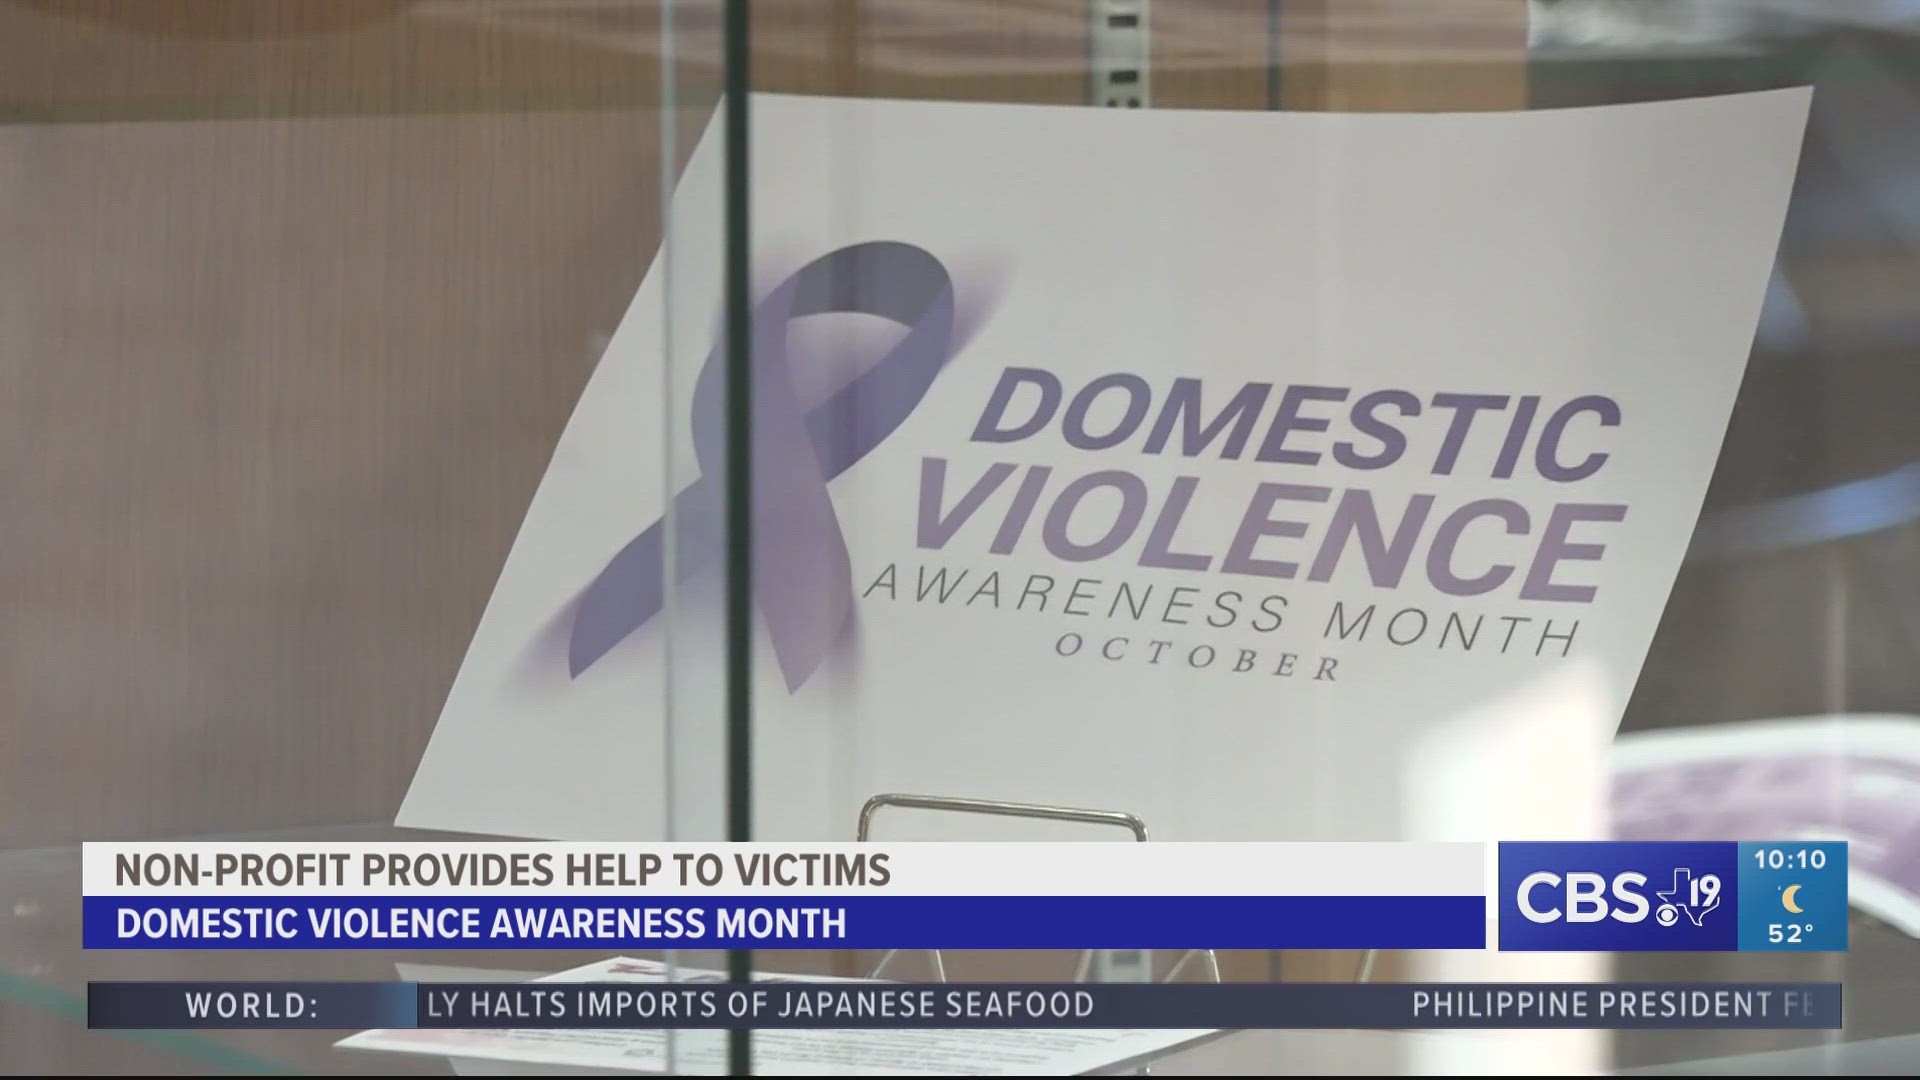 The East Texas Crisis Center offers various services like a shelter for women, counseling and even advocacy in courts.